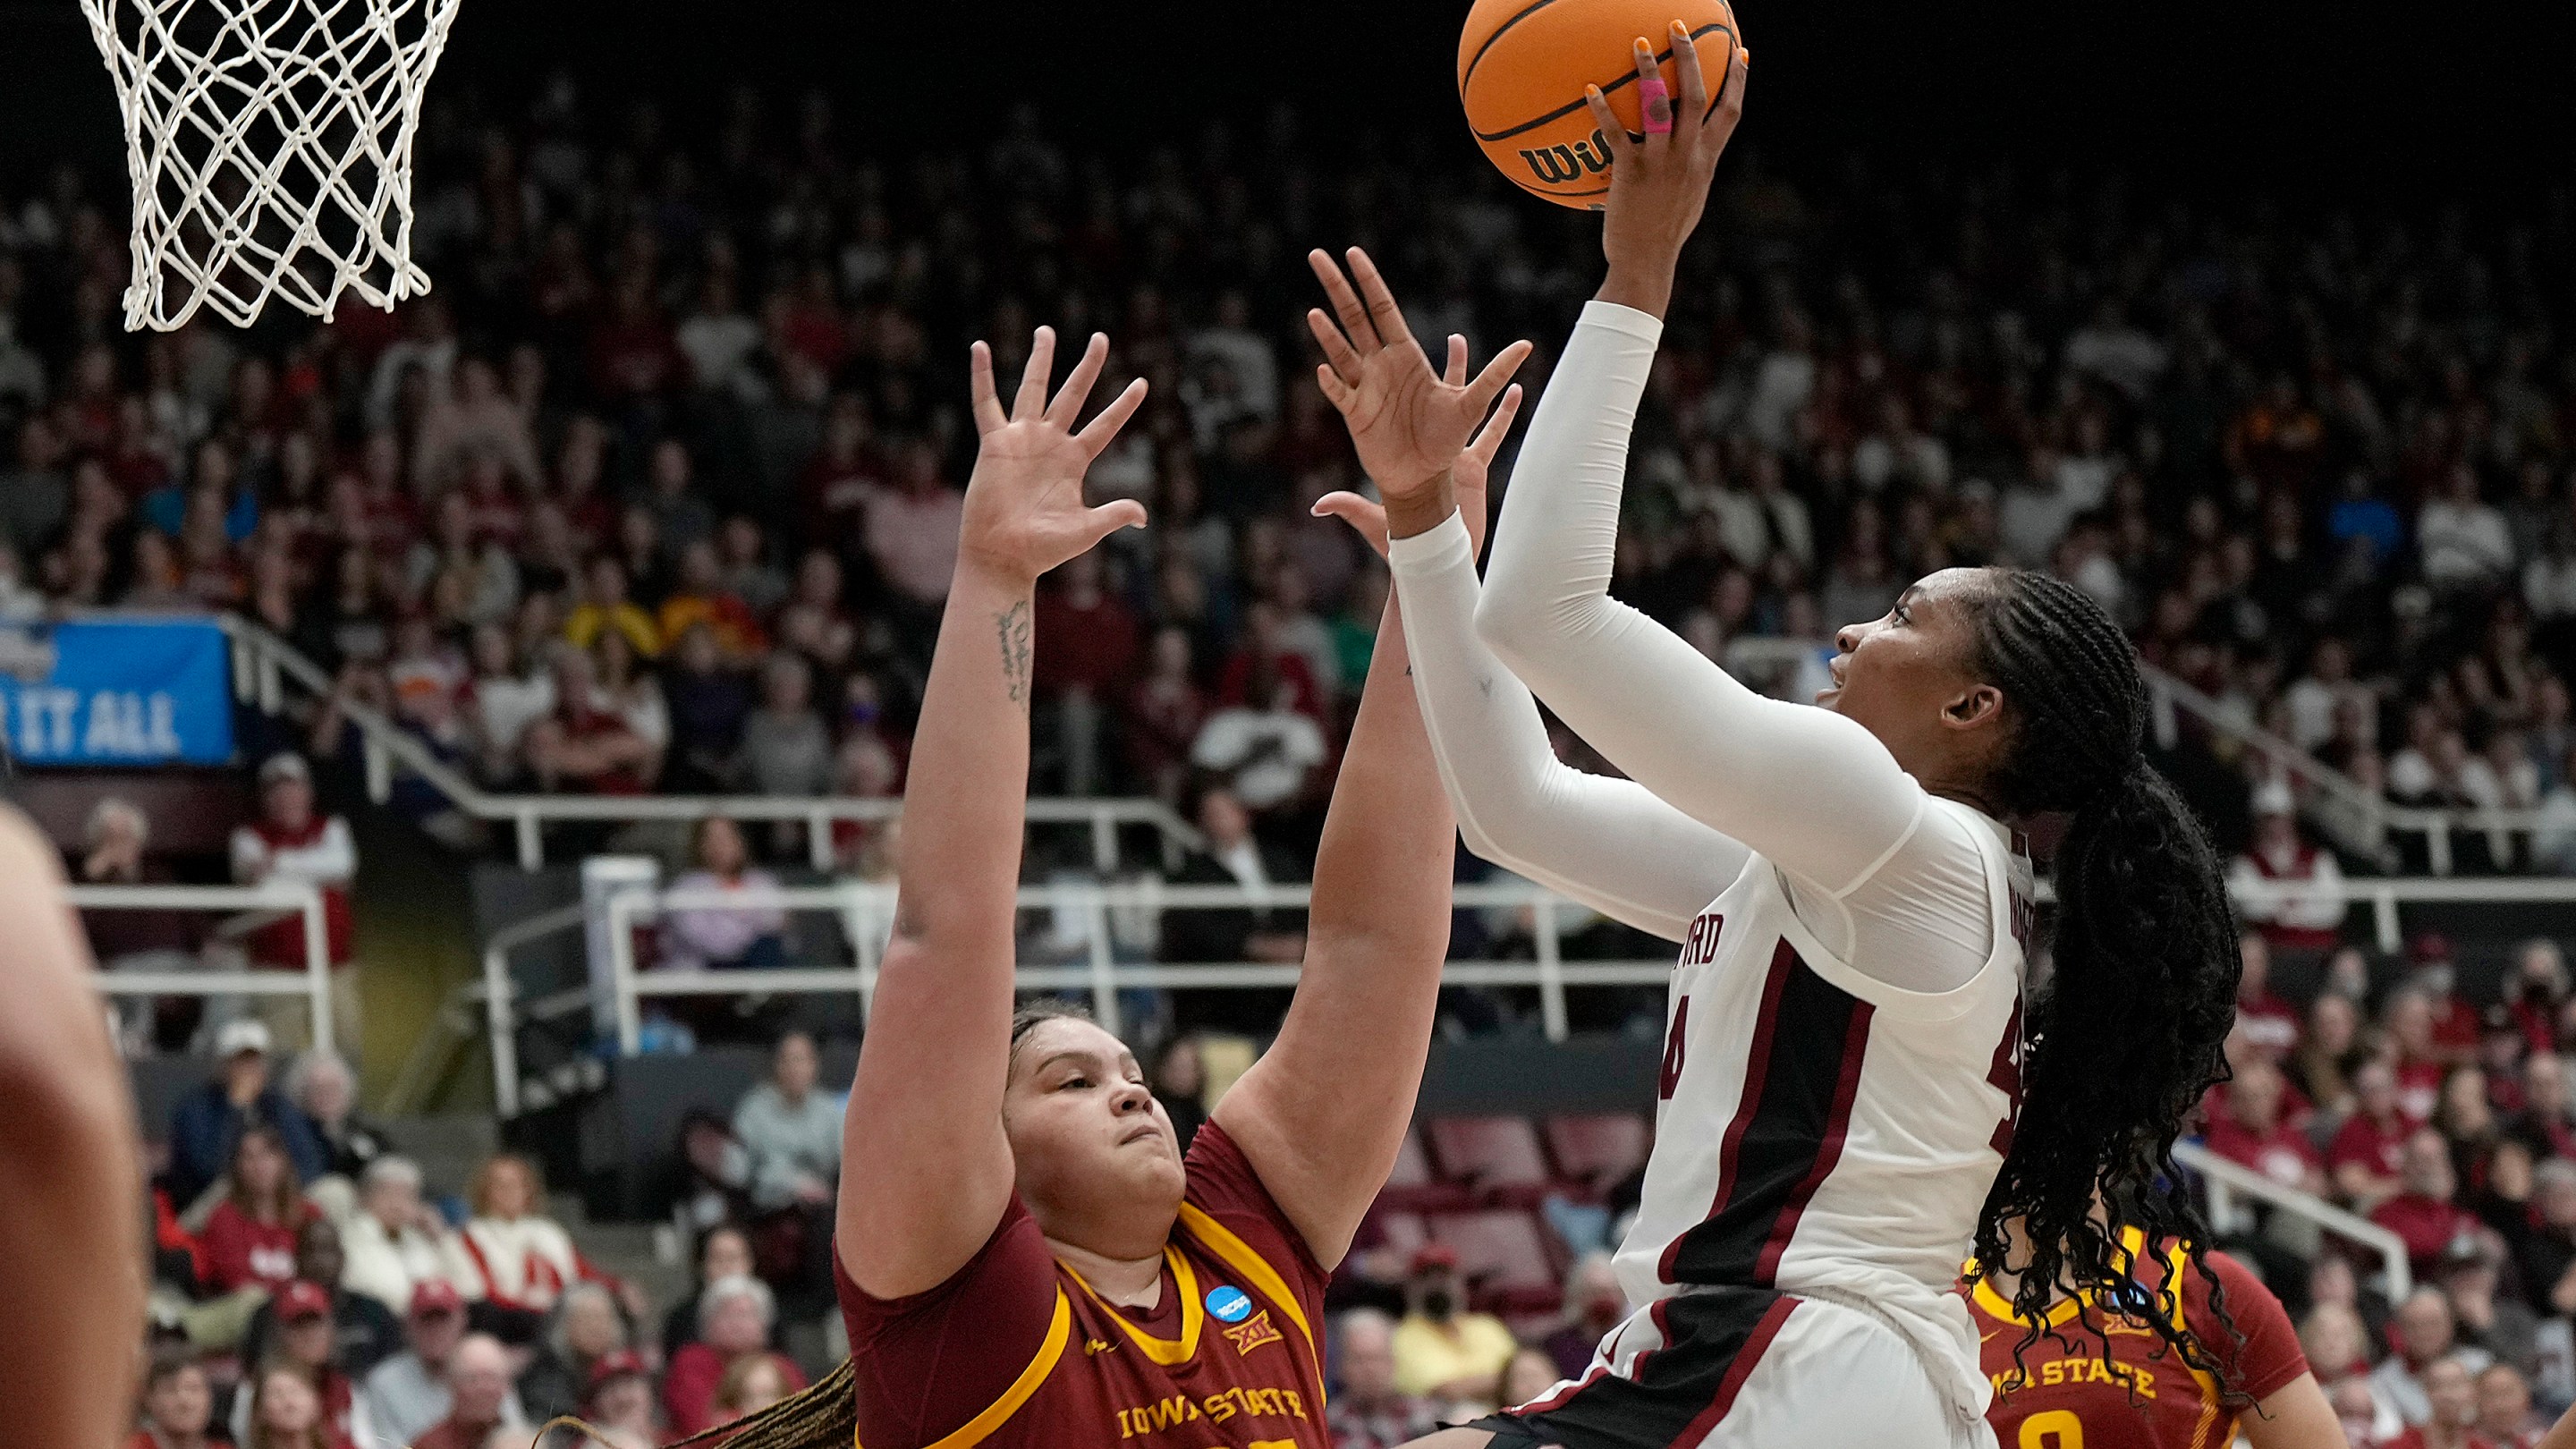 Kiki Iriafen #44 of the Stanford Cardinal drives to the basket on Audi Crooks #55 of the Iowa State Cyclones during the second half in the second round of the NCAA Women's Basketball Tournament at Stanford Maples Pavilion on March 24, 2024 in Palo Alto, California.